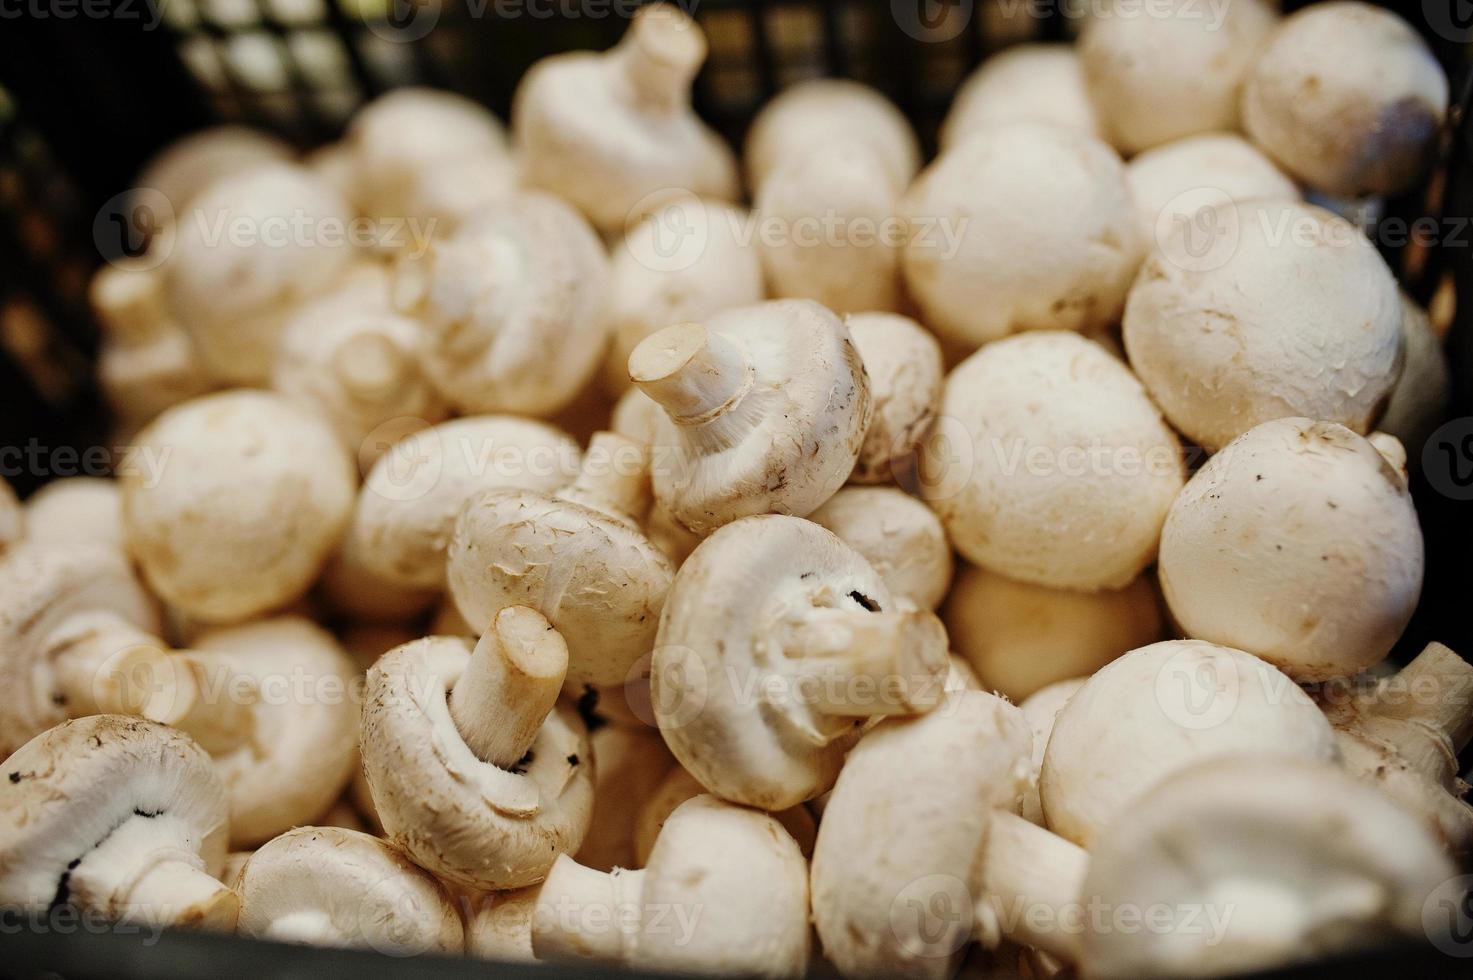 Champignon mushrooms on the shelf of a supermarket or grocery store. photo